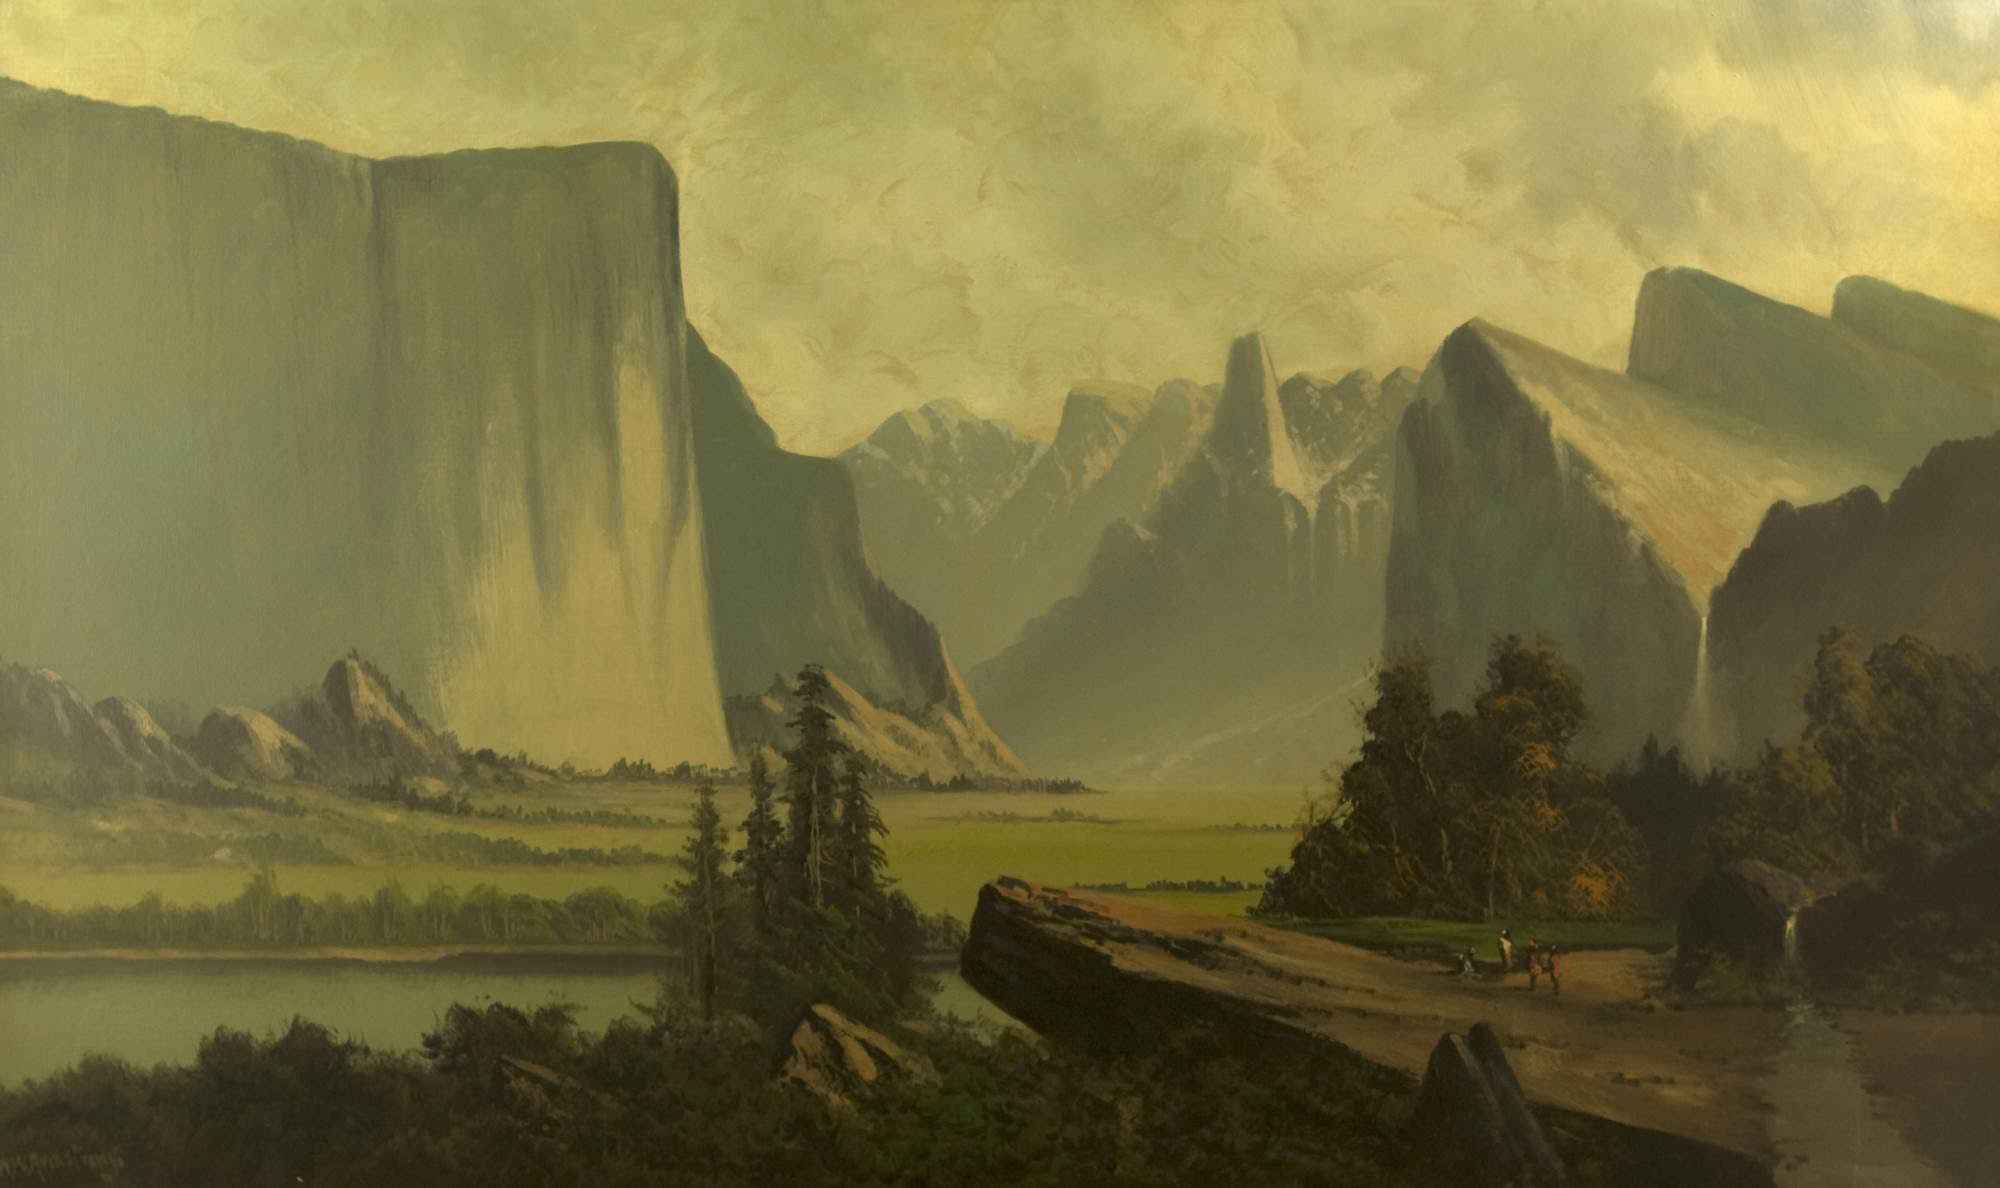 Painting View of Yosemite Valley